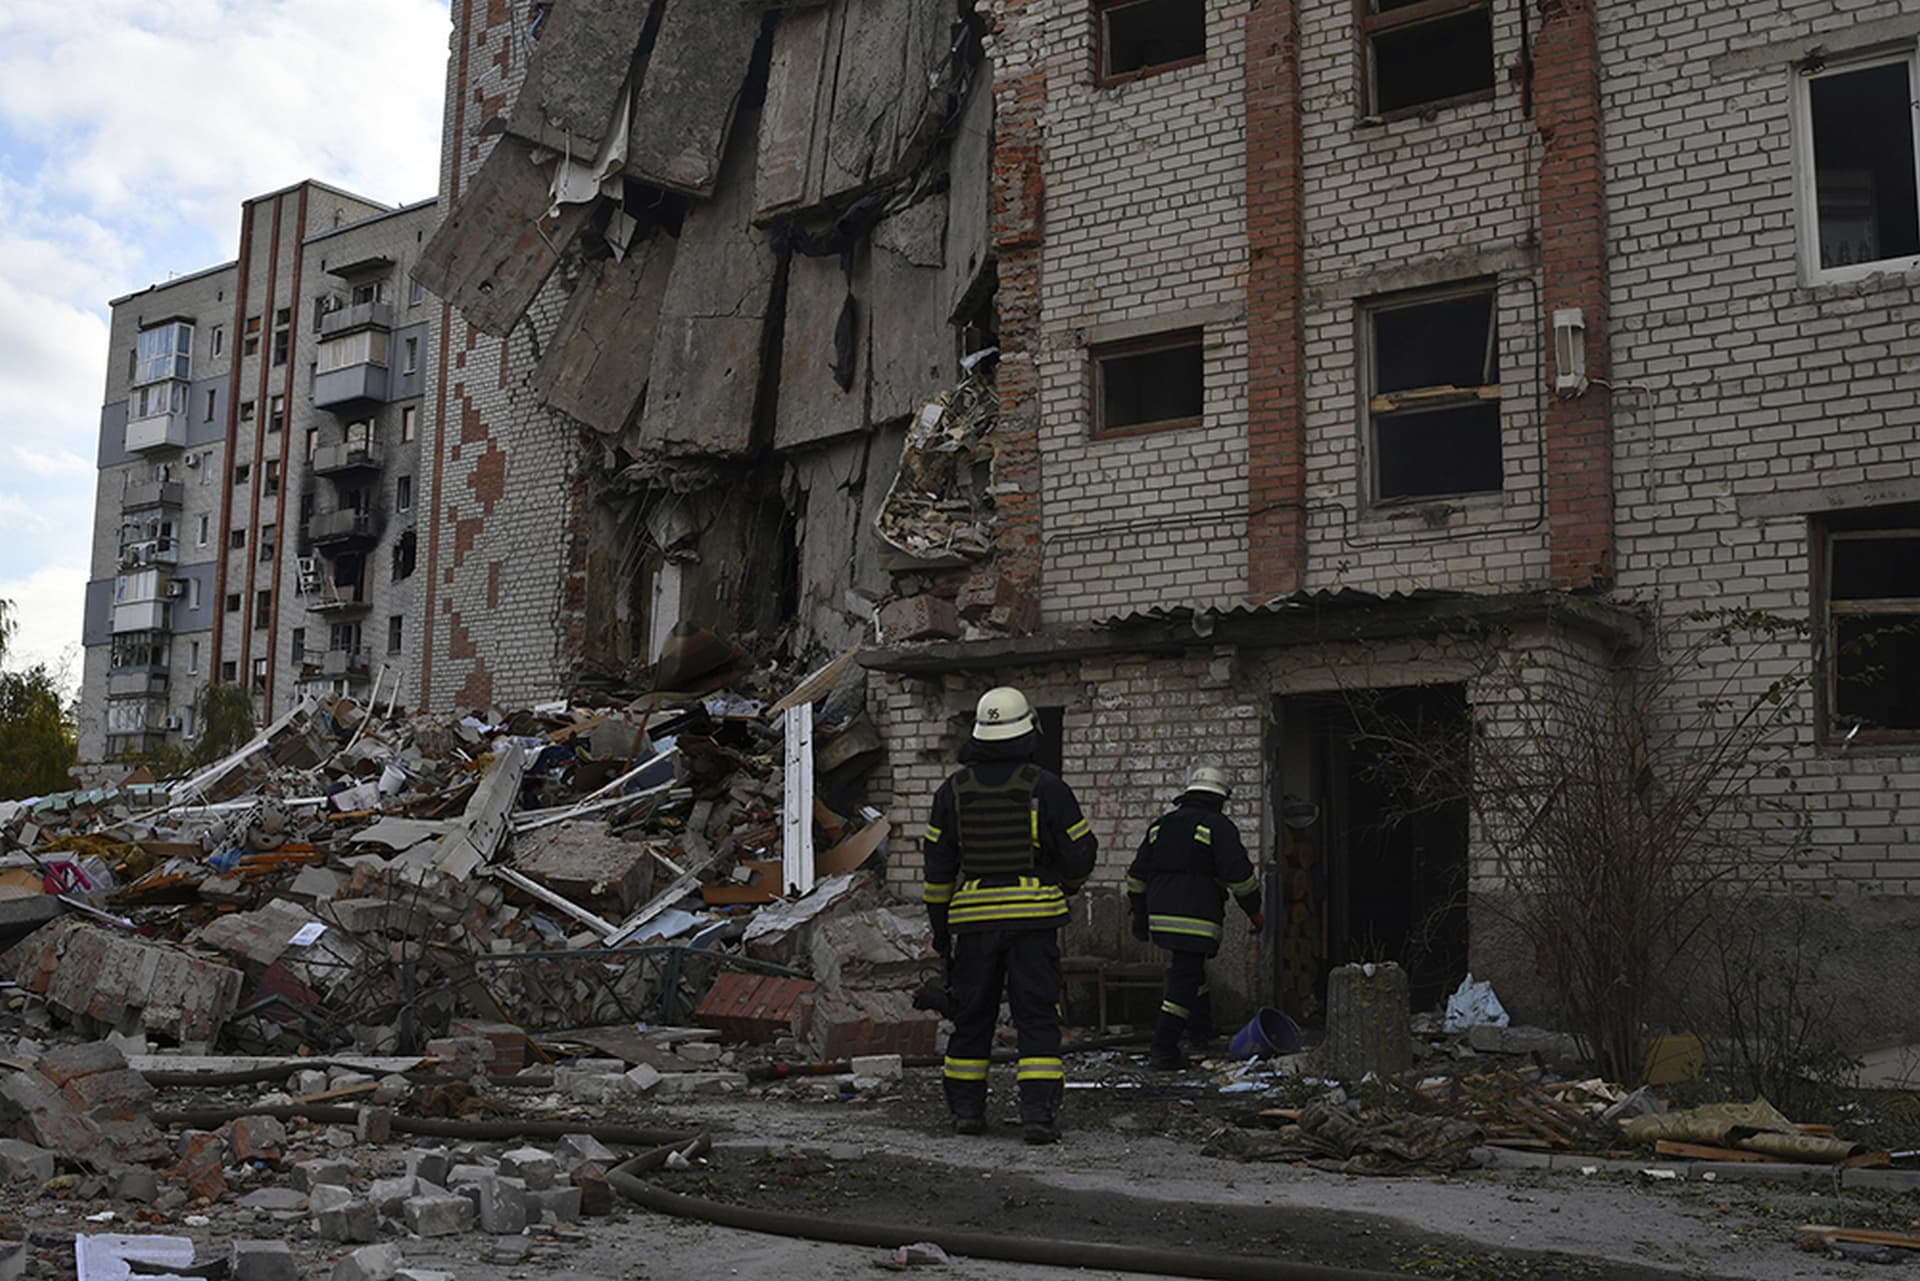 Firefighters work at the scene of a damaged residential building after Russian shelling in the liberated Lyman